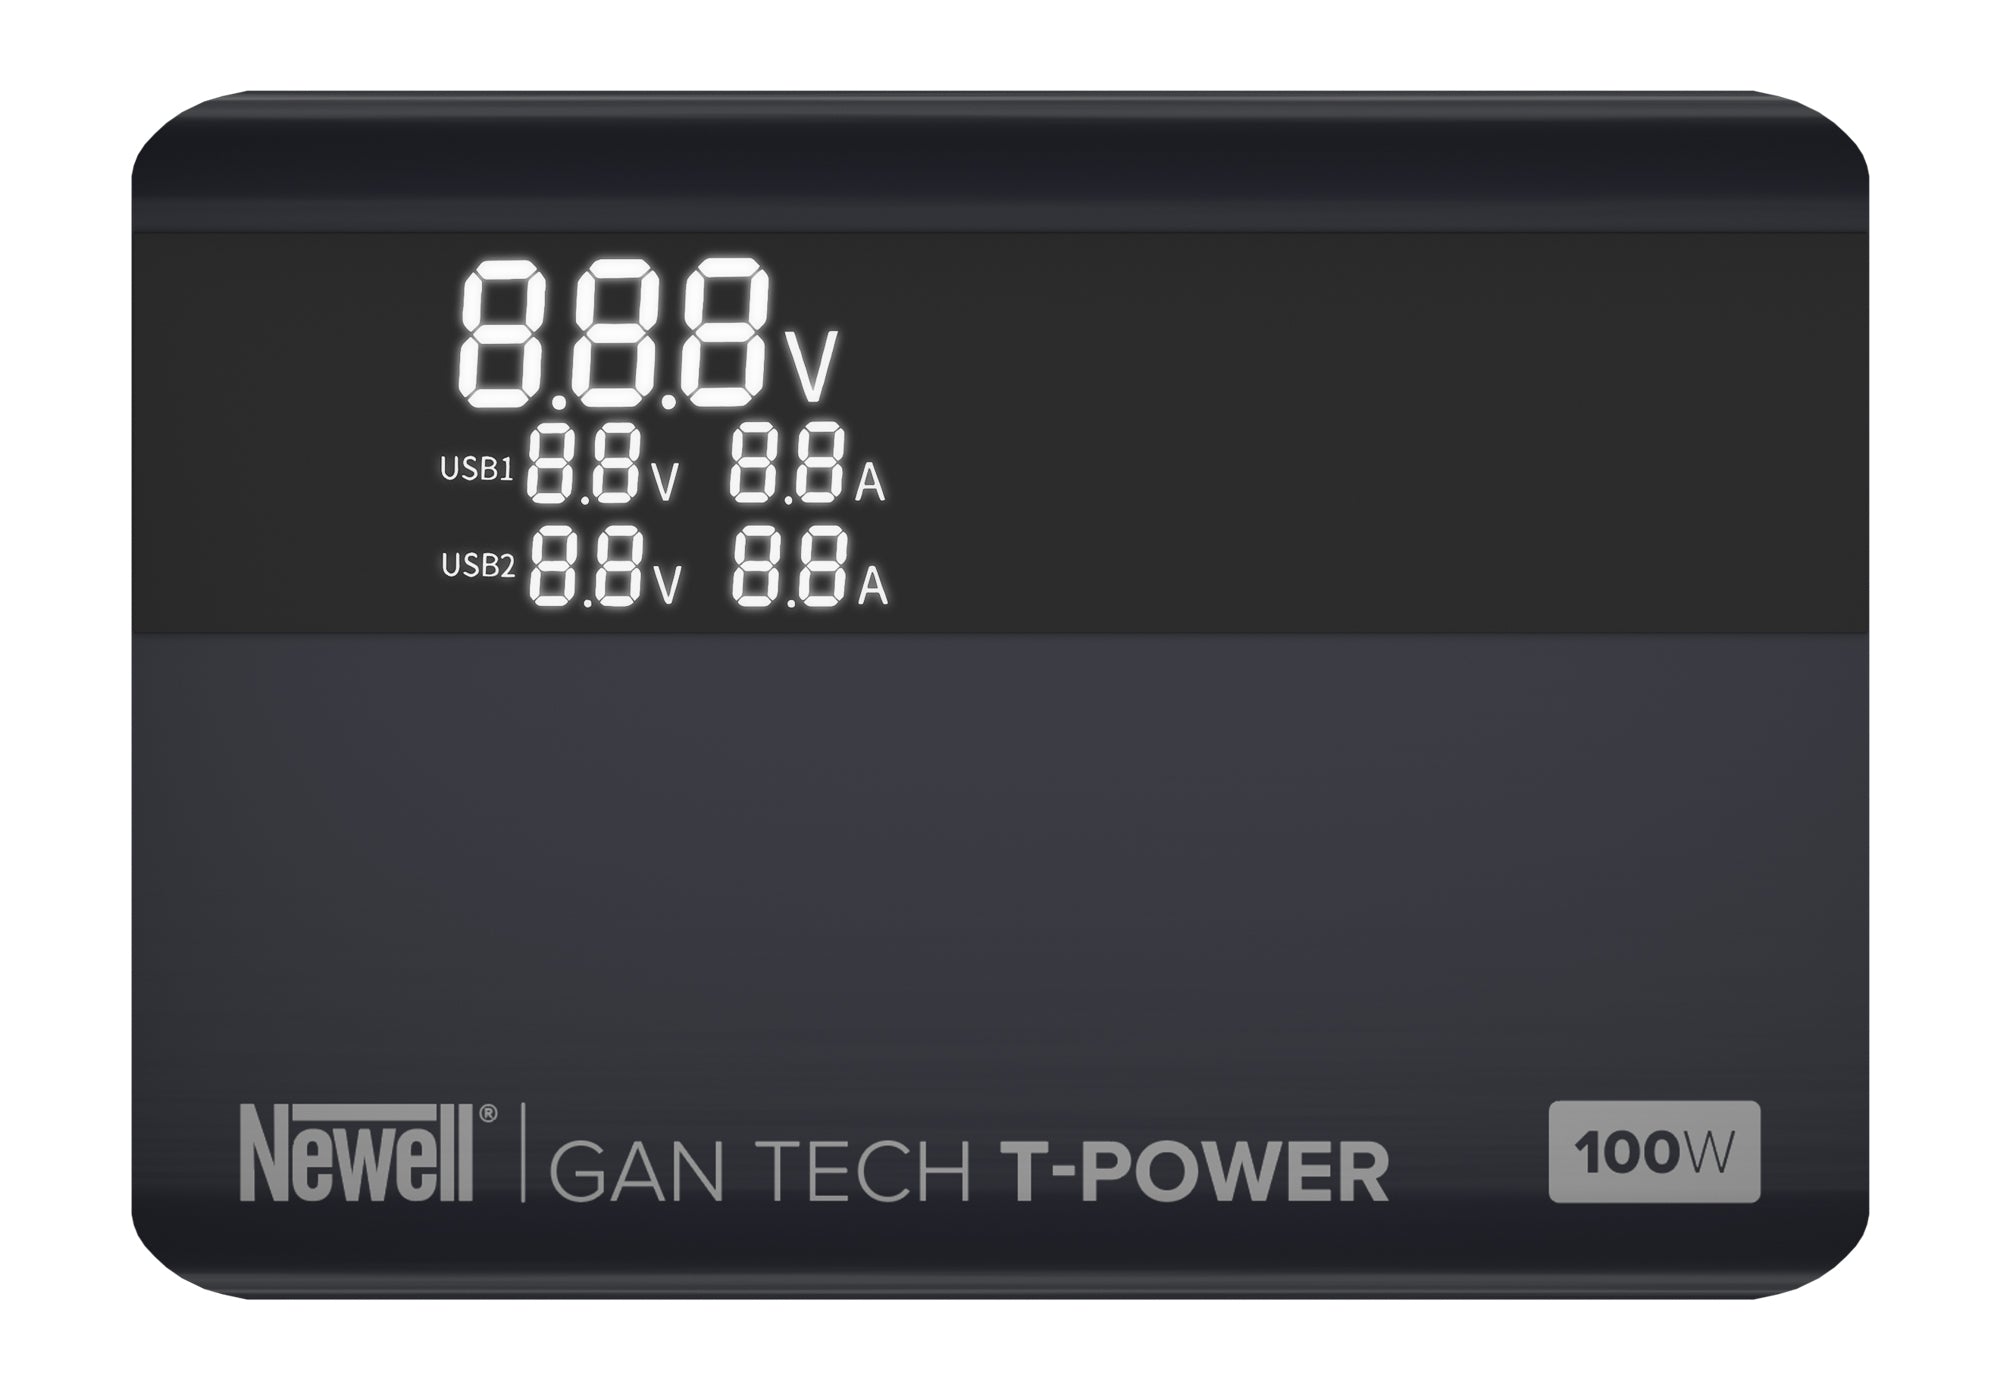 Newell GaN Tech T-power 100 W Charger - FAST USB-C and USB-A recharge multiple devices at once!